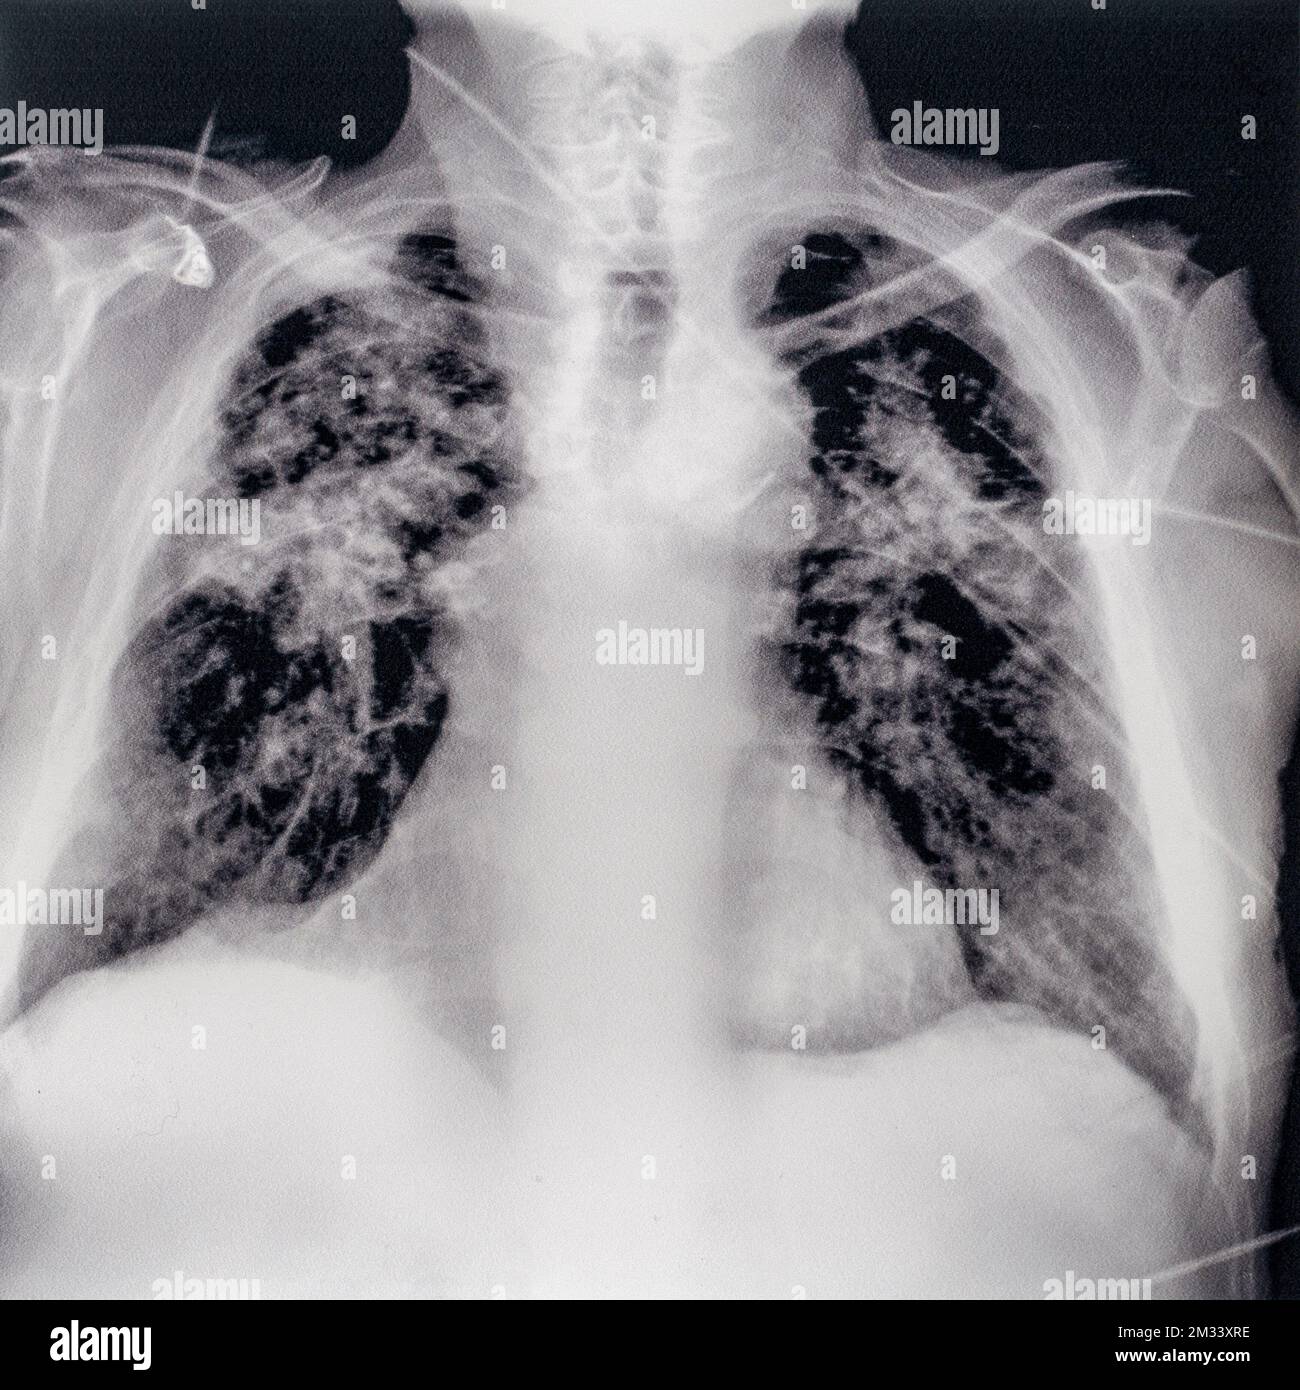 Old mid 20th century X-ray photograph / radiograph showing miner's lung / silicosis, lung disease caused by inhalation of crystalline silica dust Stock Photo